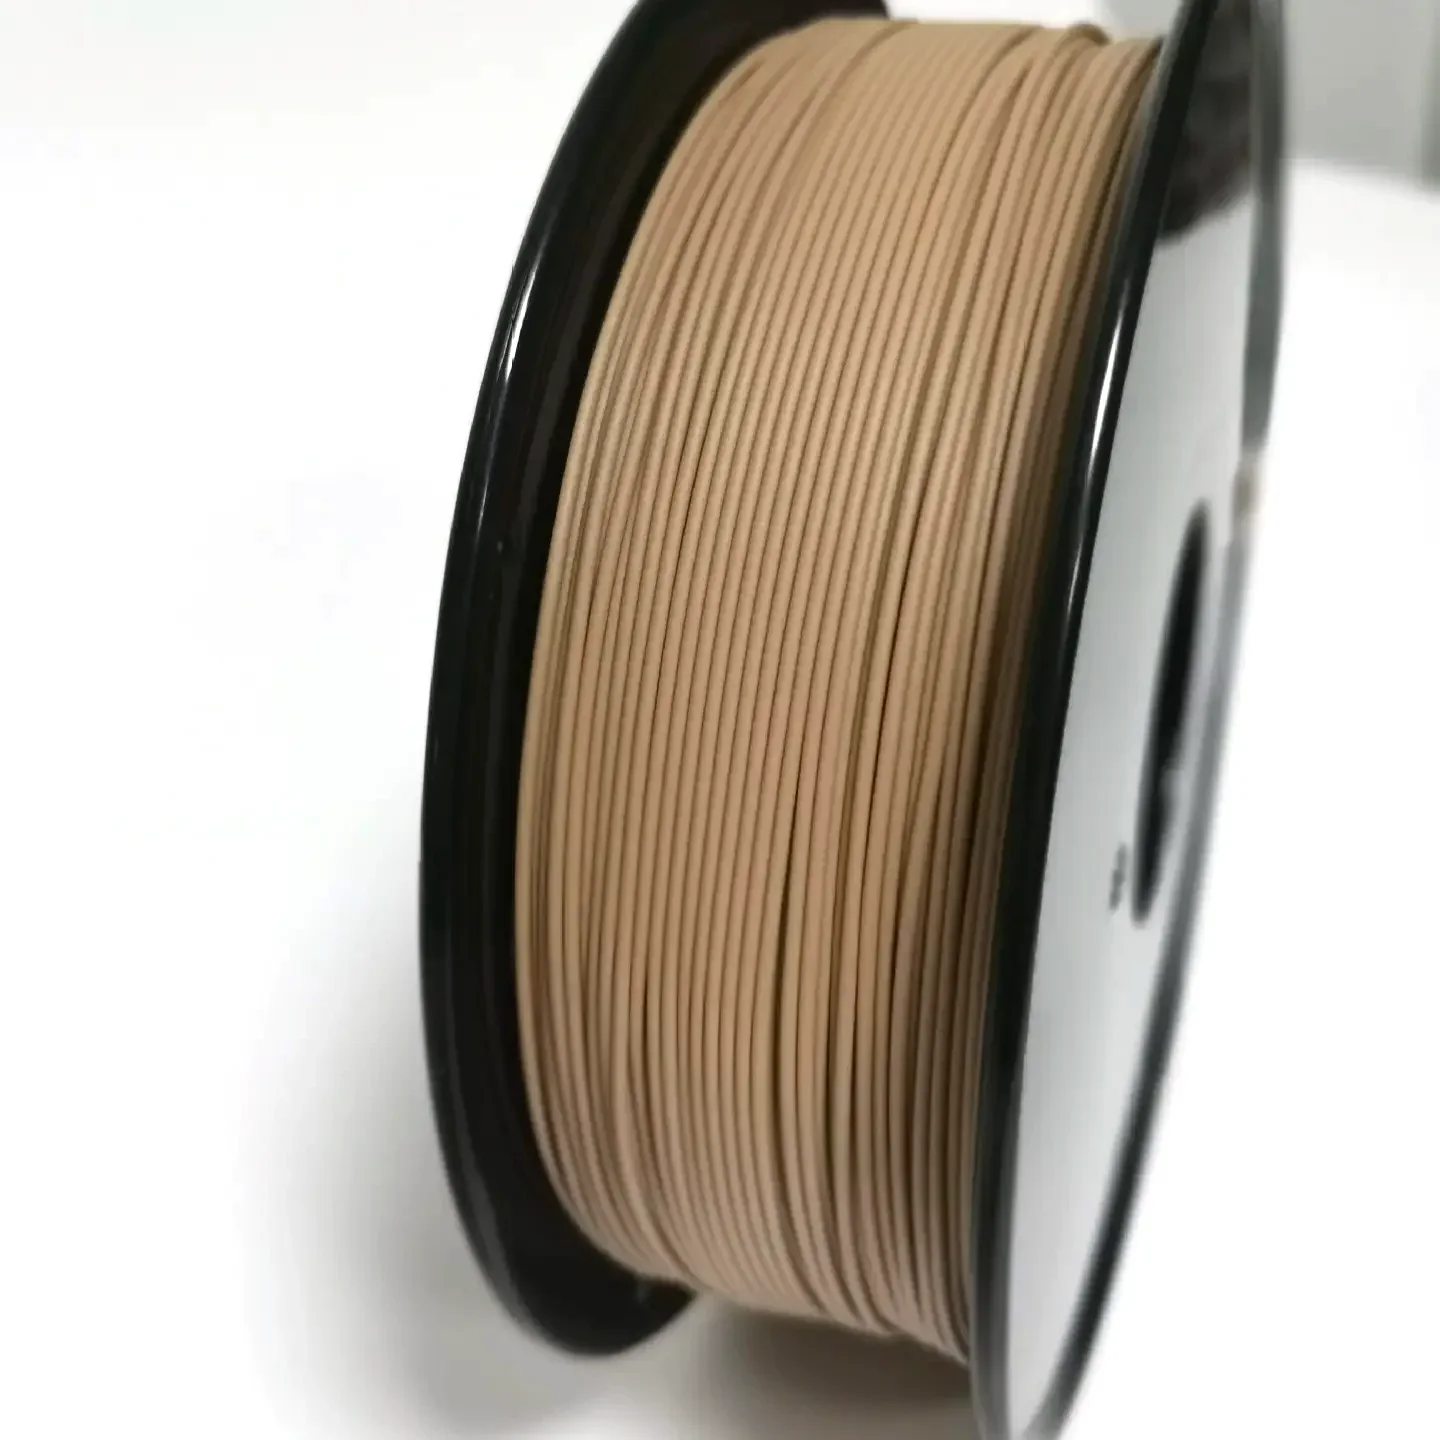 Free shipping   Wood PLA Filament Light Color (1KG/2.2lbs) 1.75mm Dimensional Accuracy +/- 0.03mm  For FDM 3D Printer